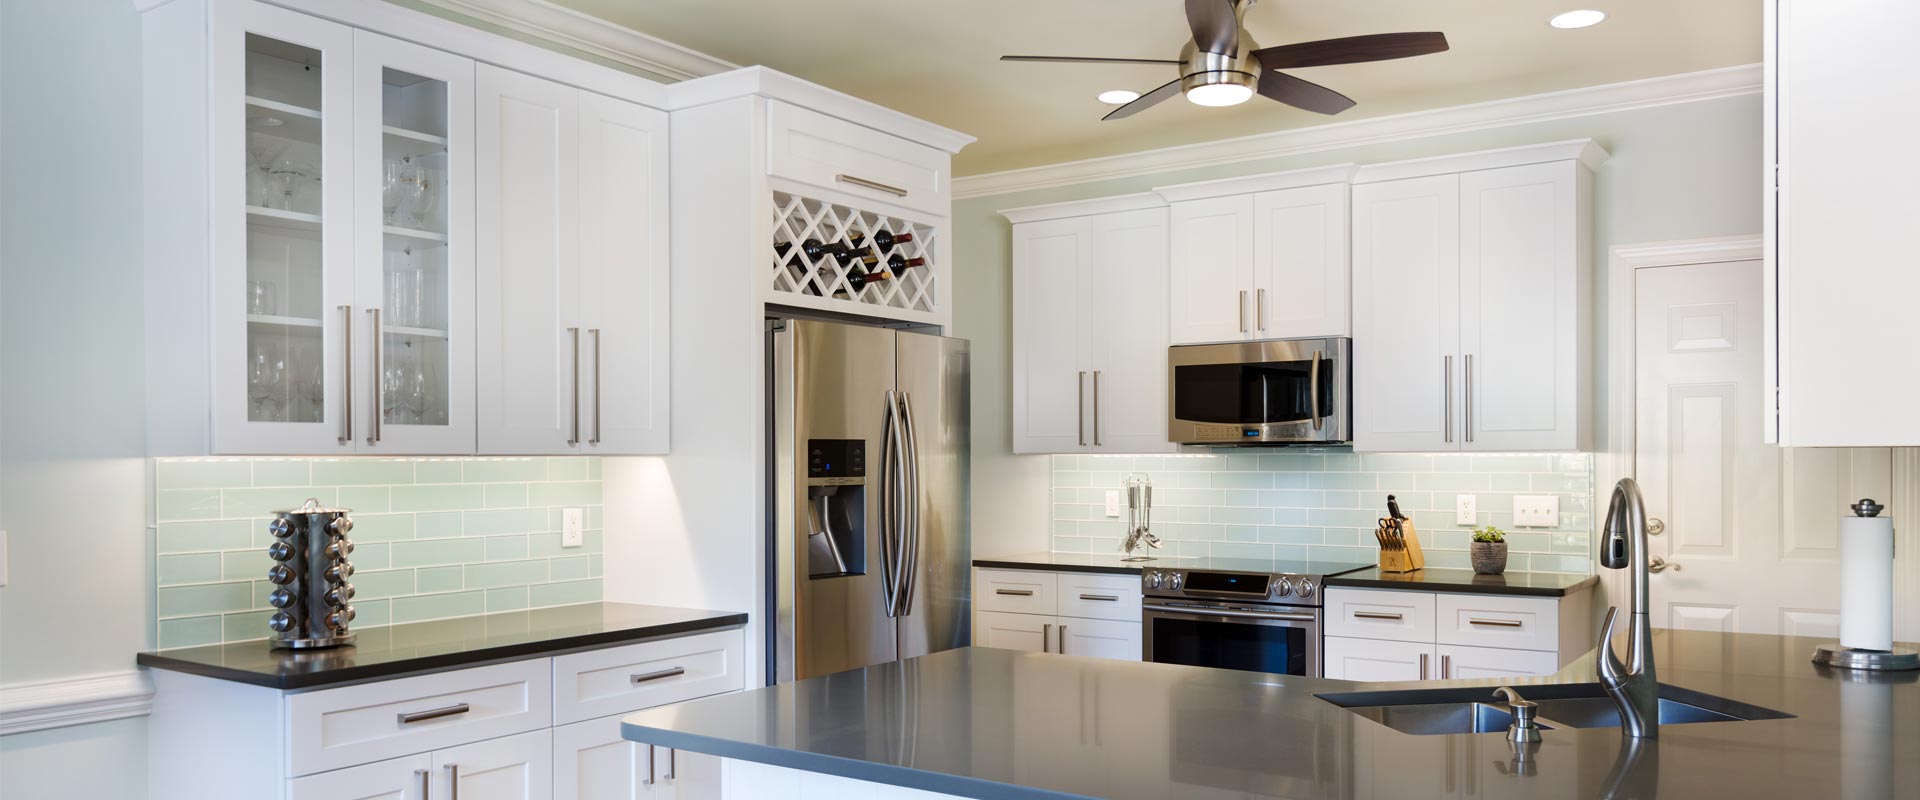 kitchen and bath remodeling hendersonville nc